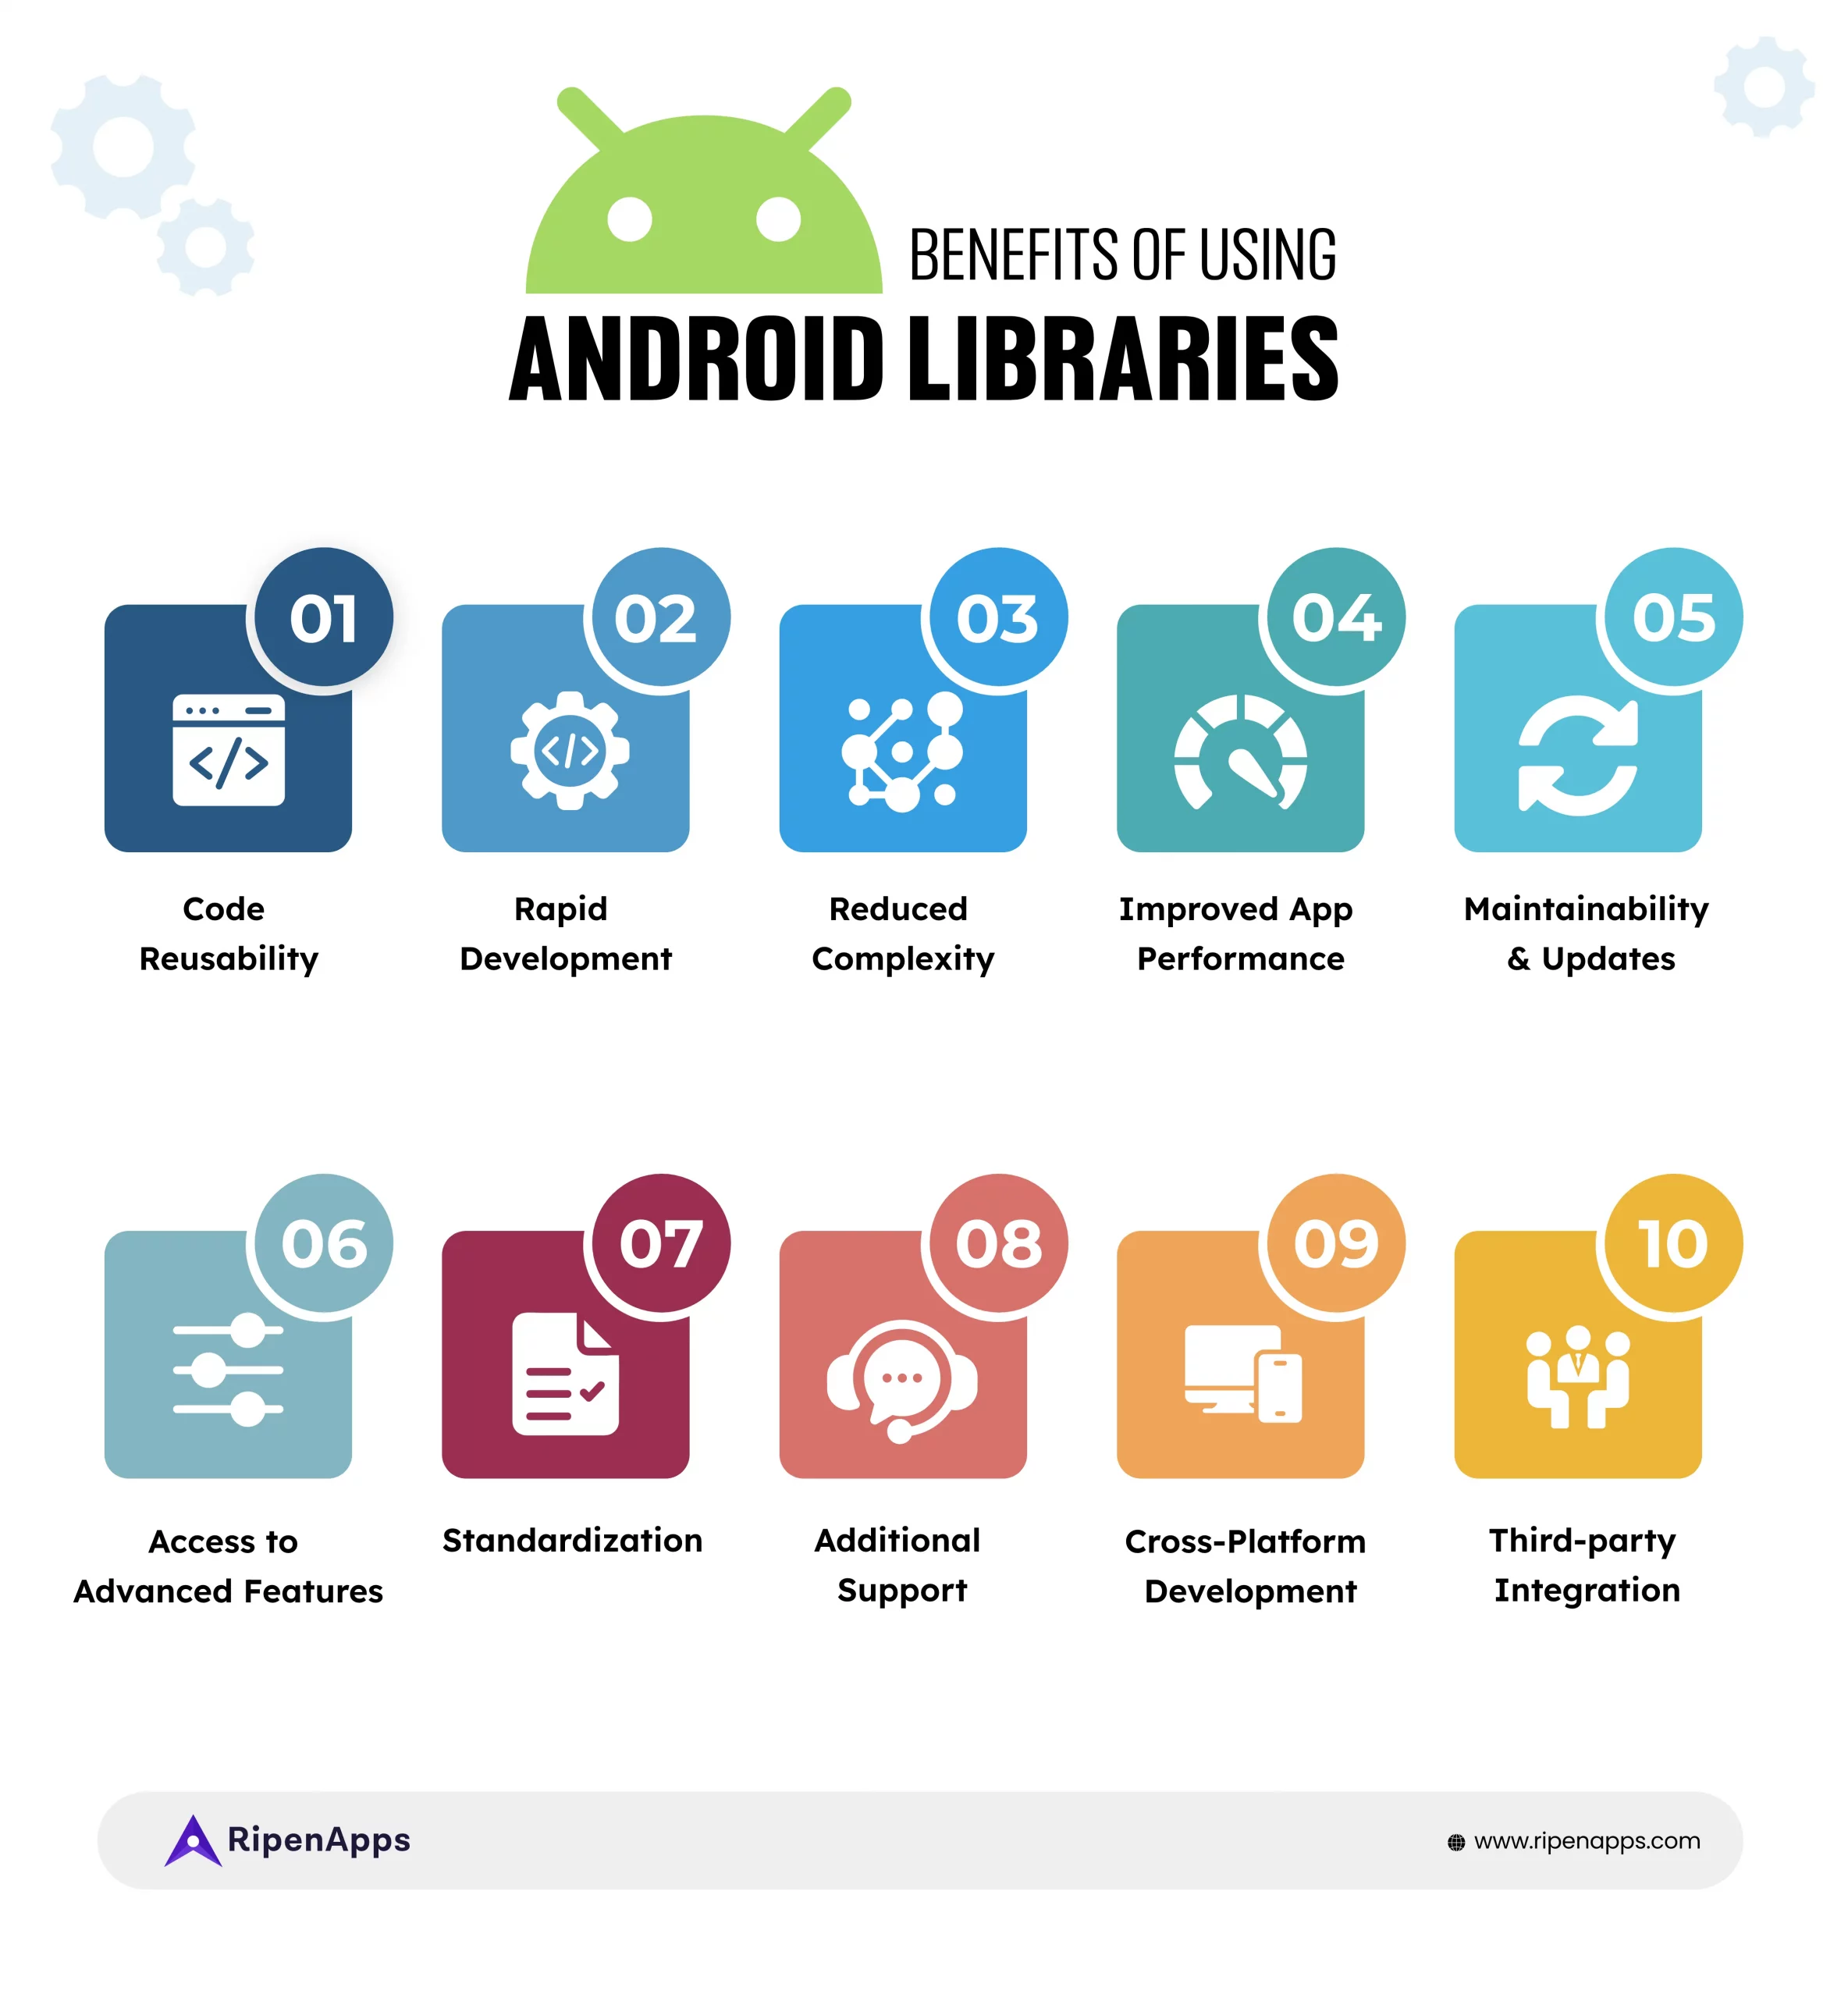 Benefits of Using Android Libraries